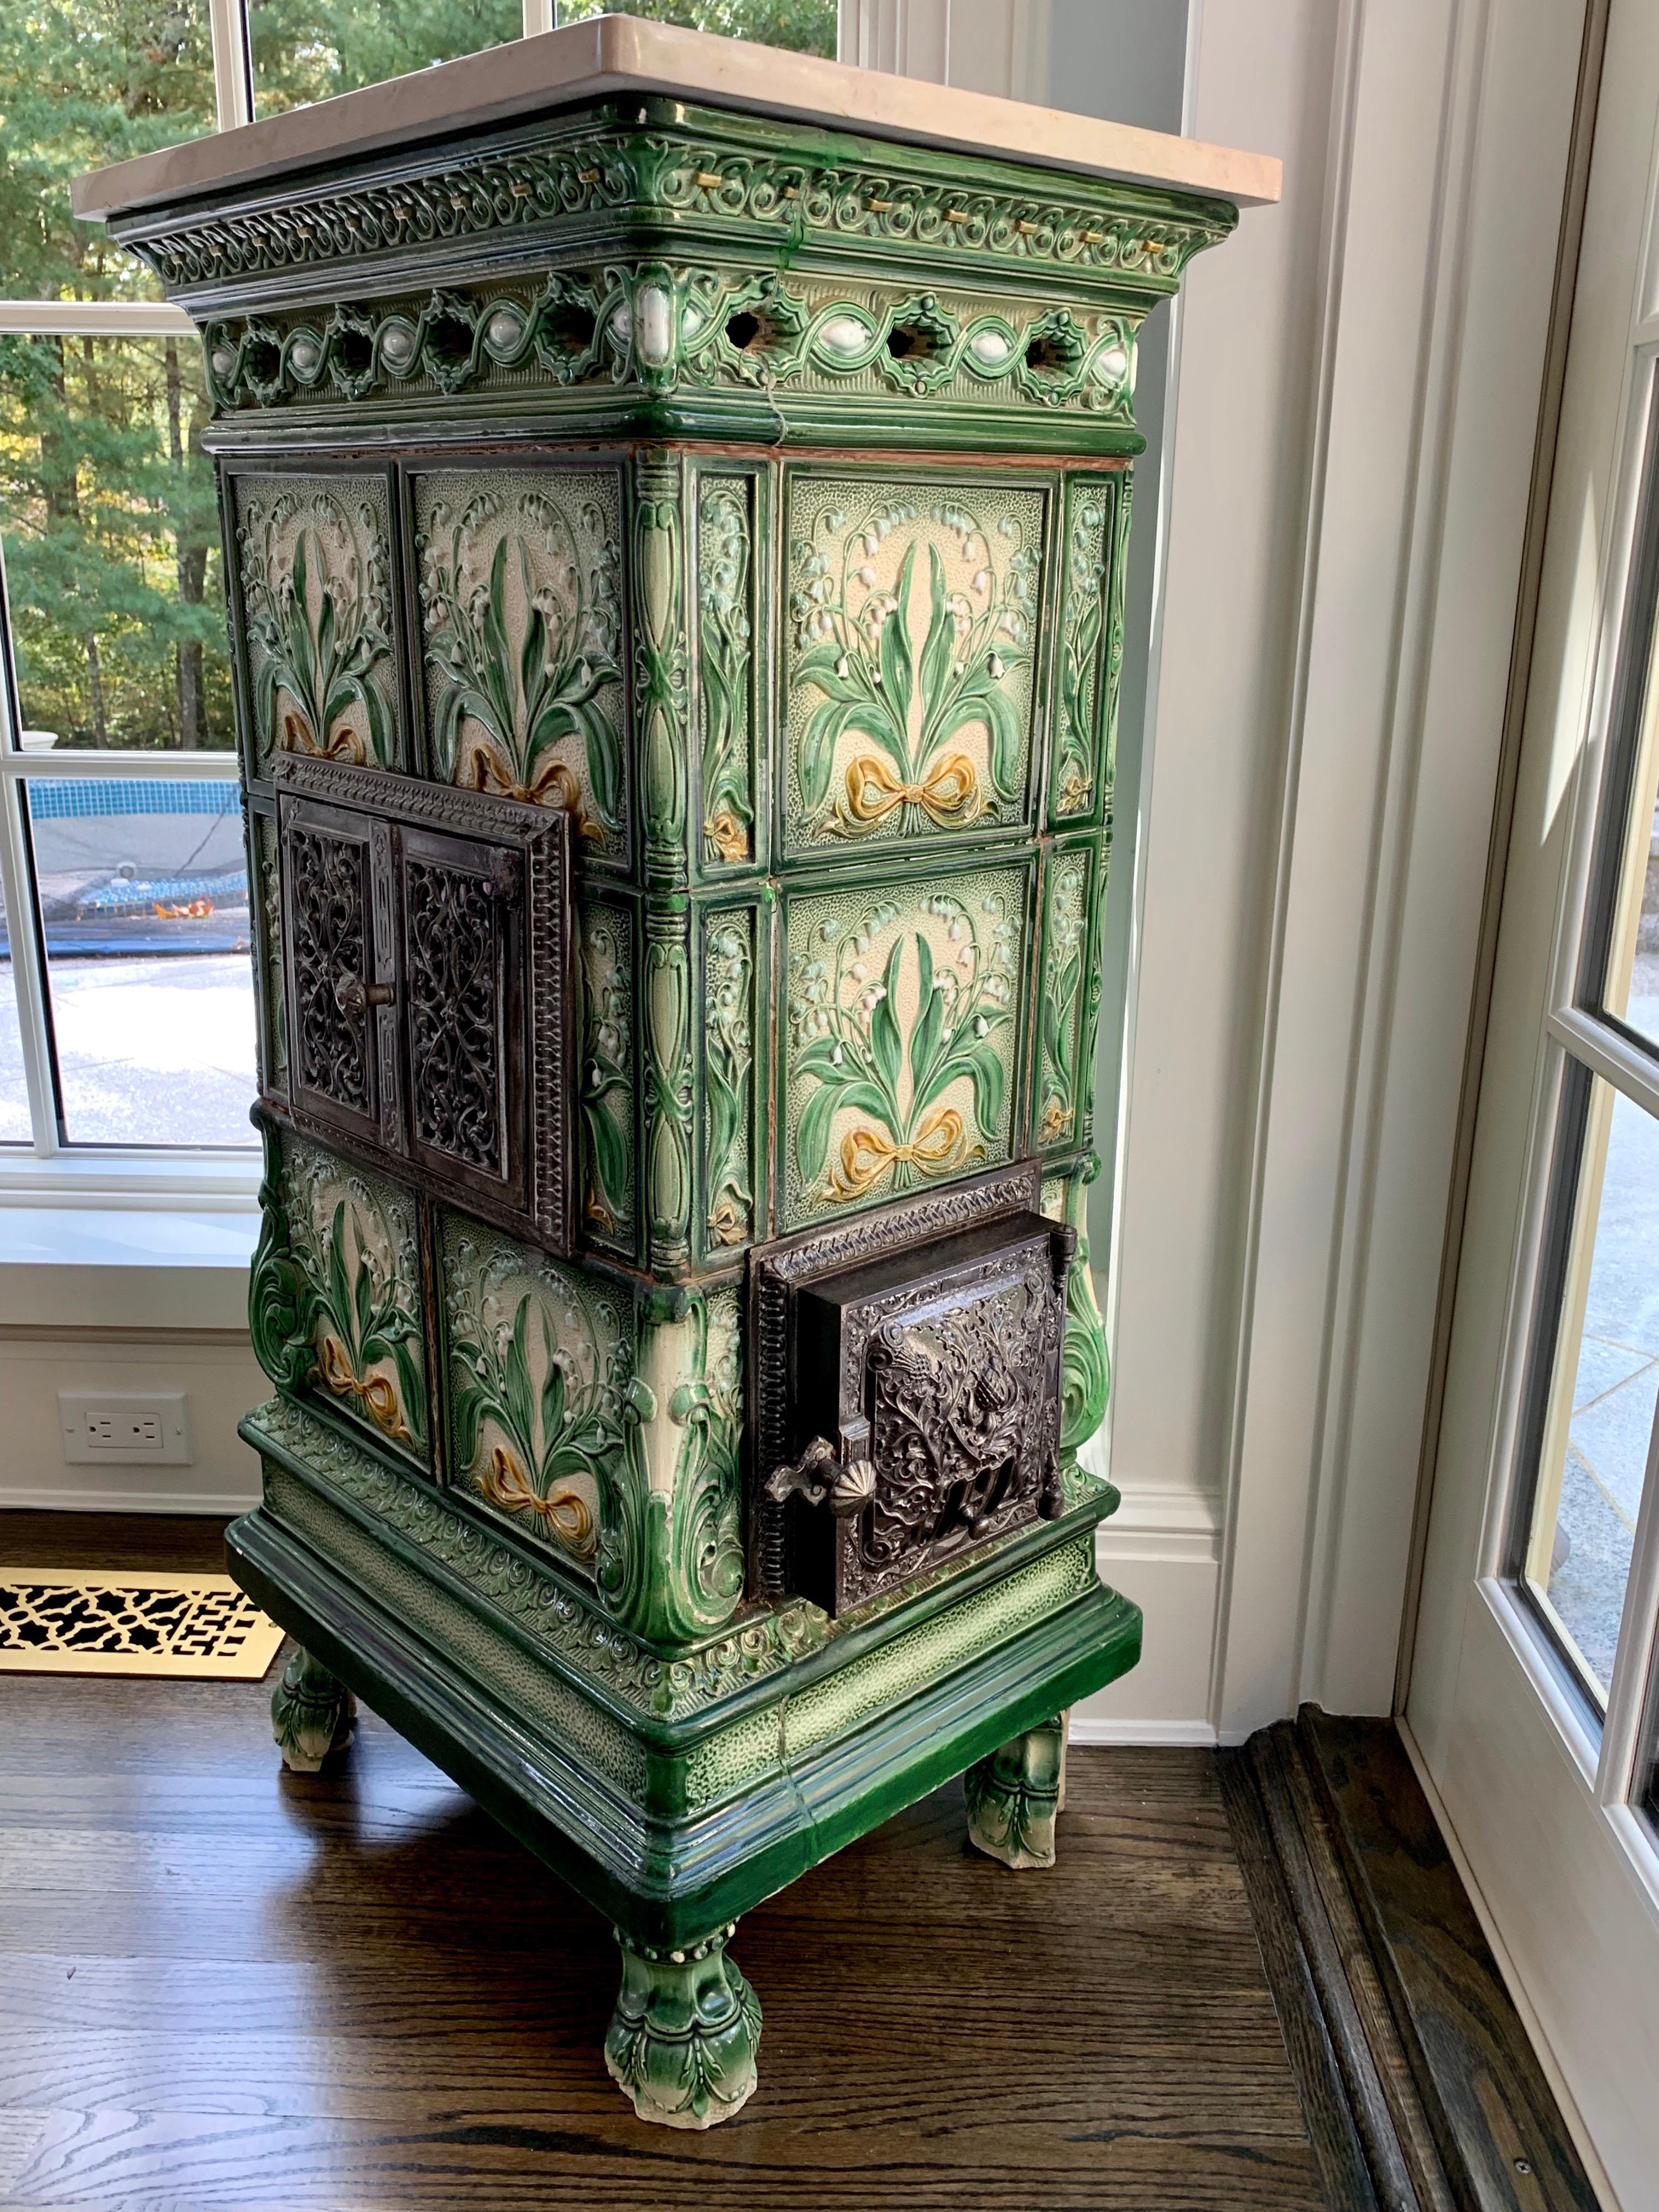 This beautiful French Majolica tile stove is from circa 1910- 1920. The Tiles depict Lillies of The Valley in relief.